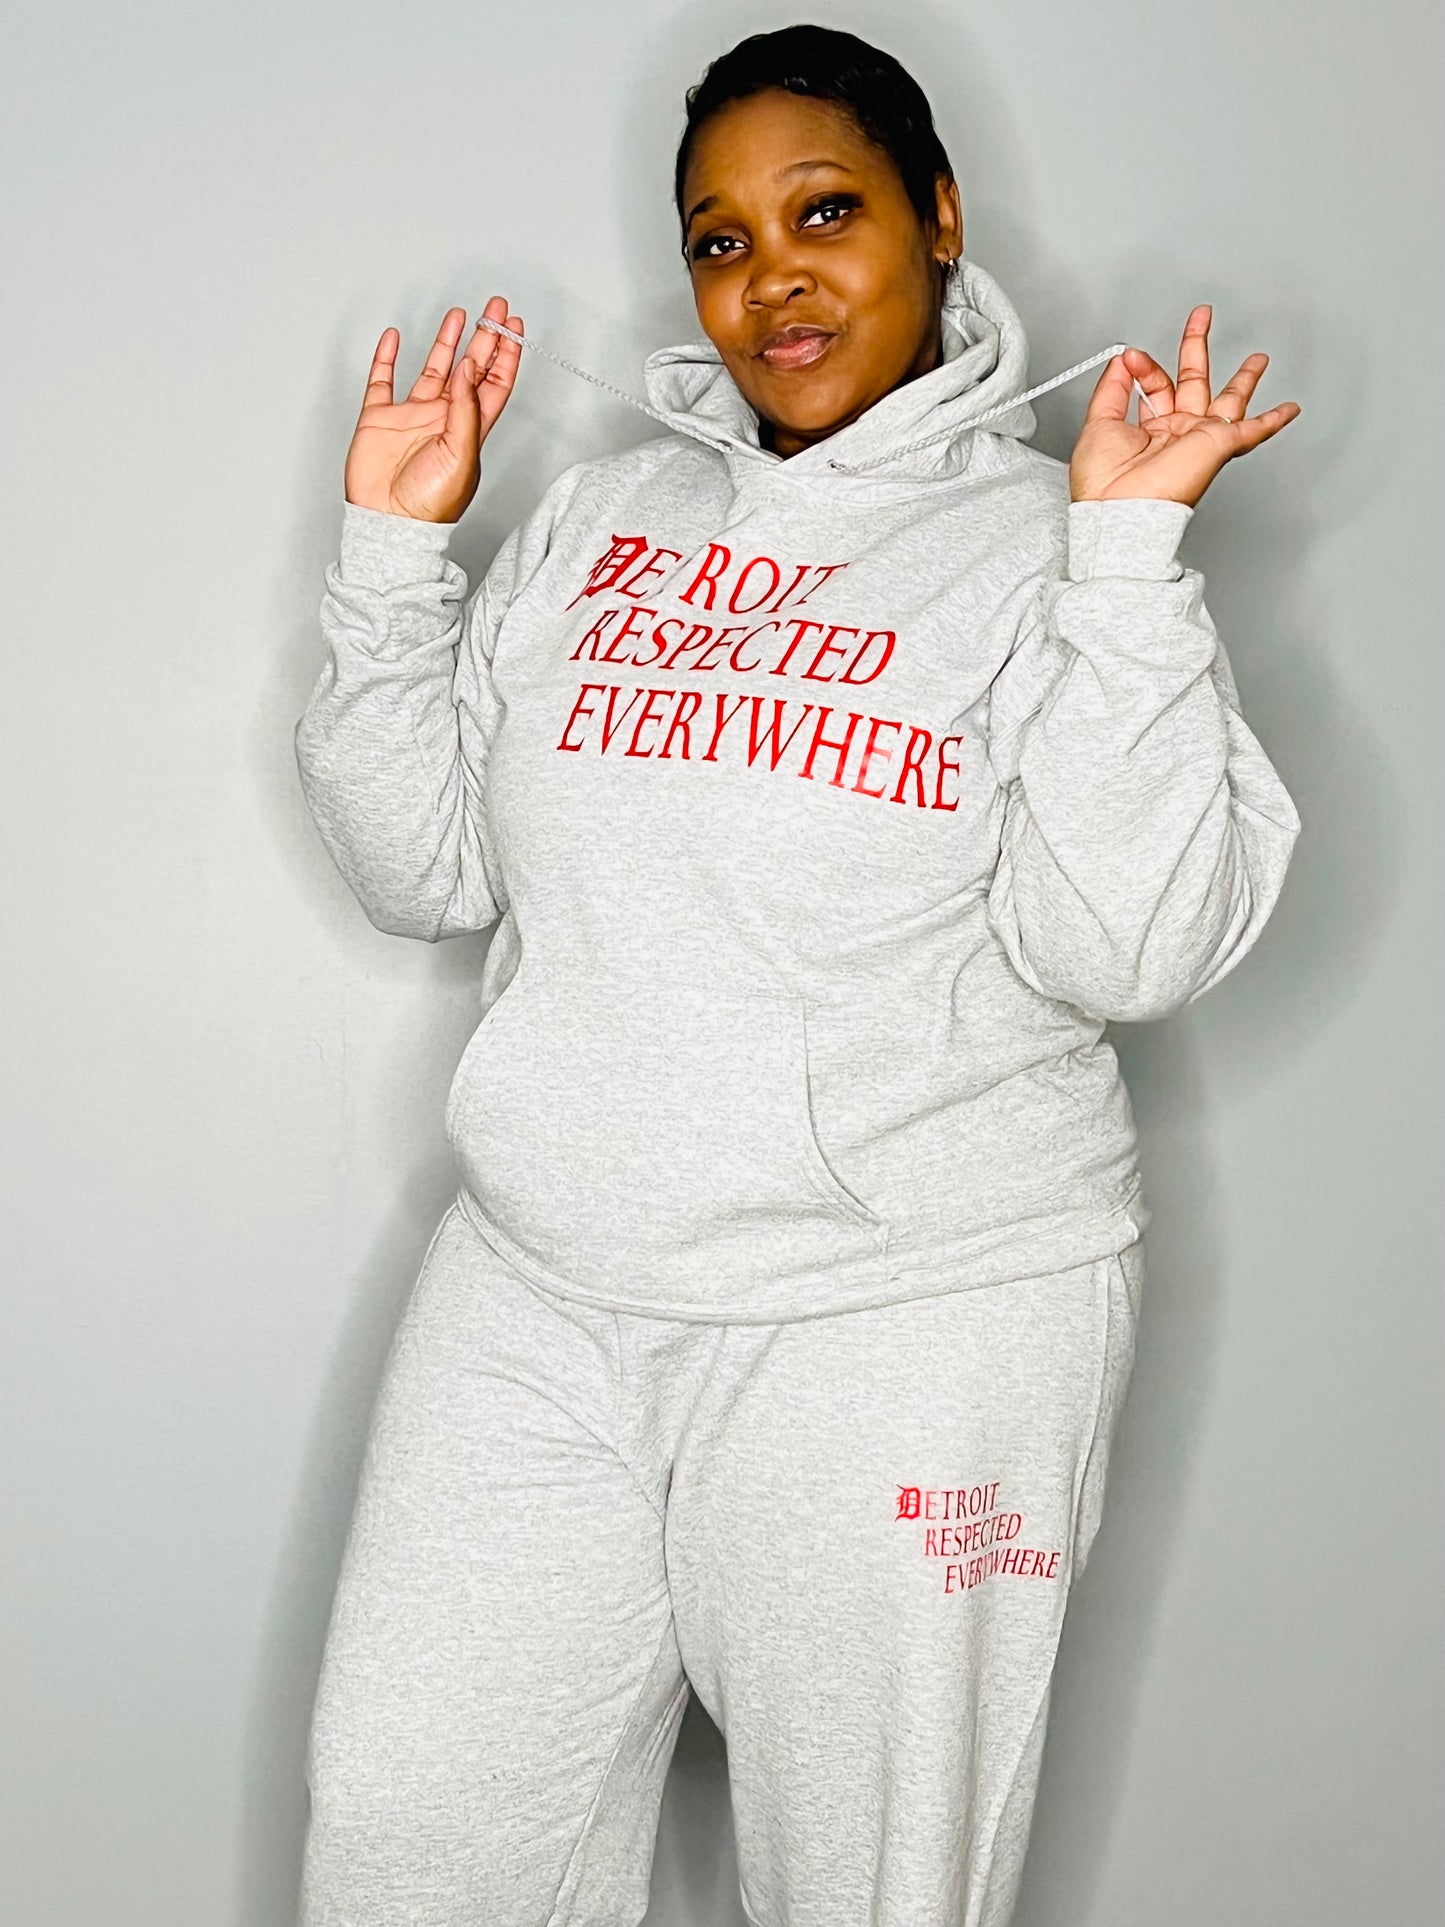 Gray Staggered Jogging Suit w/ red letters